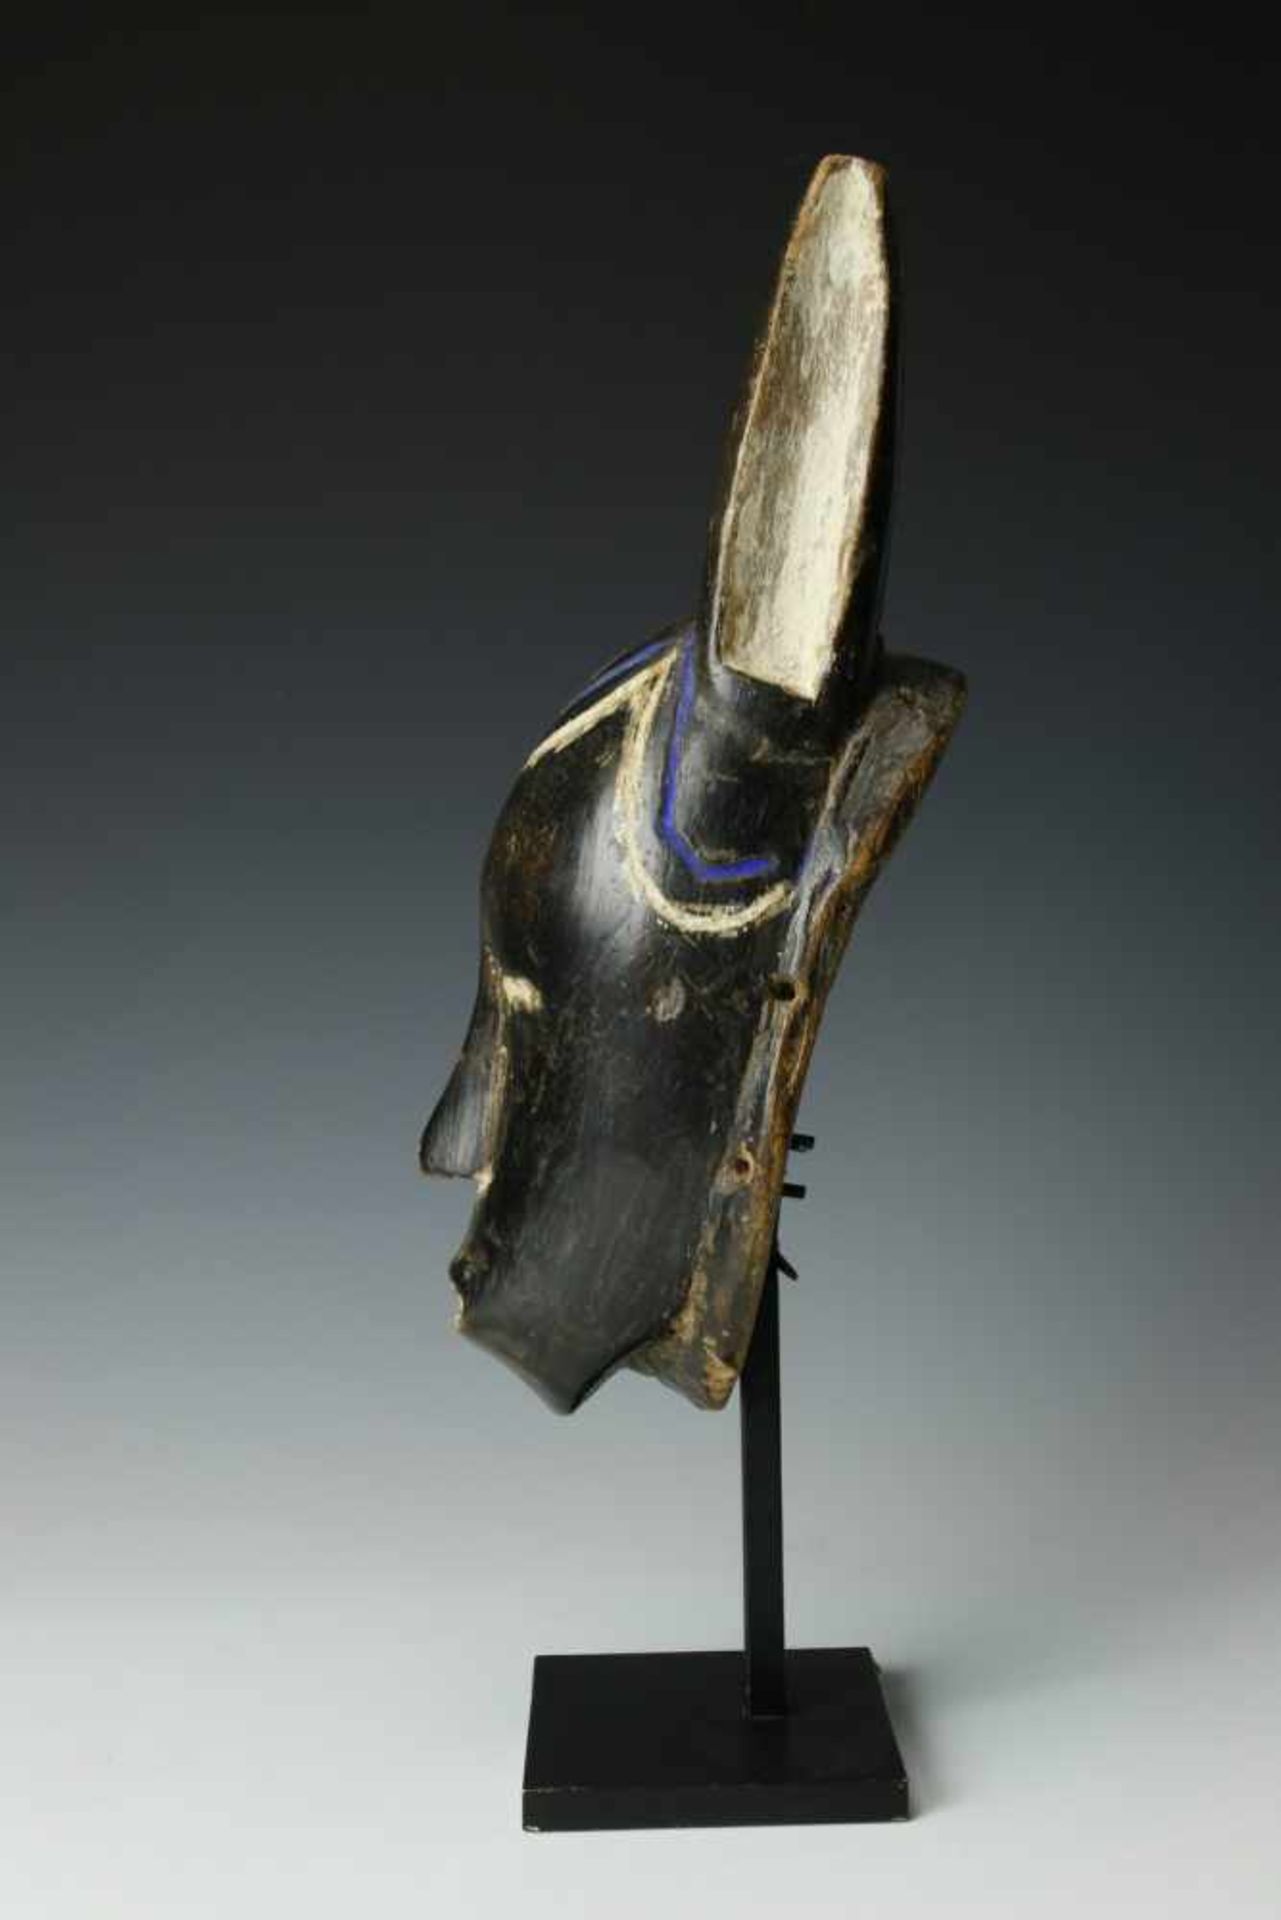 Ivory Coast, Guro, face mask,with straight horns, engraved hairline with accents in blue and